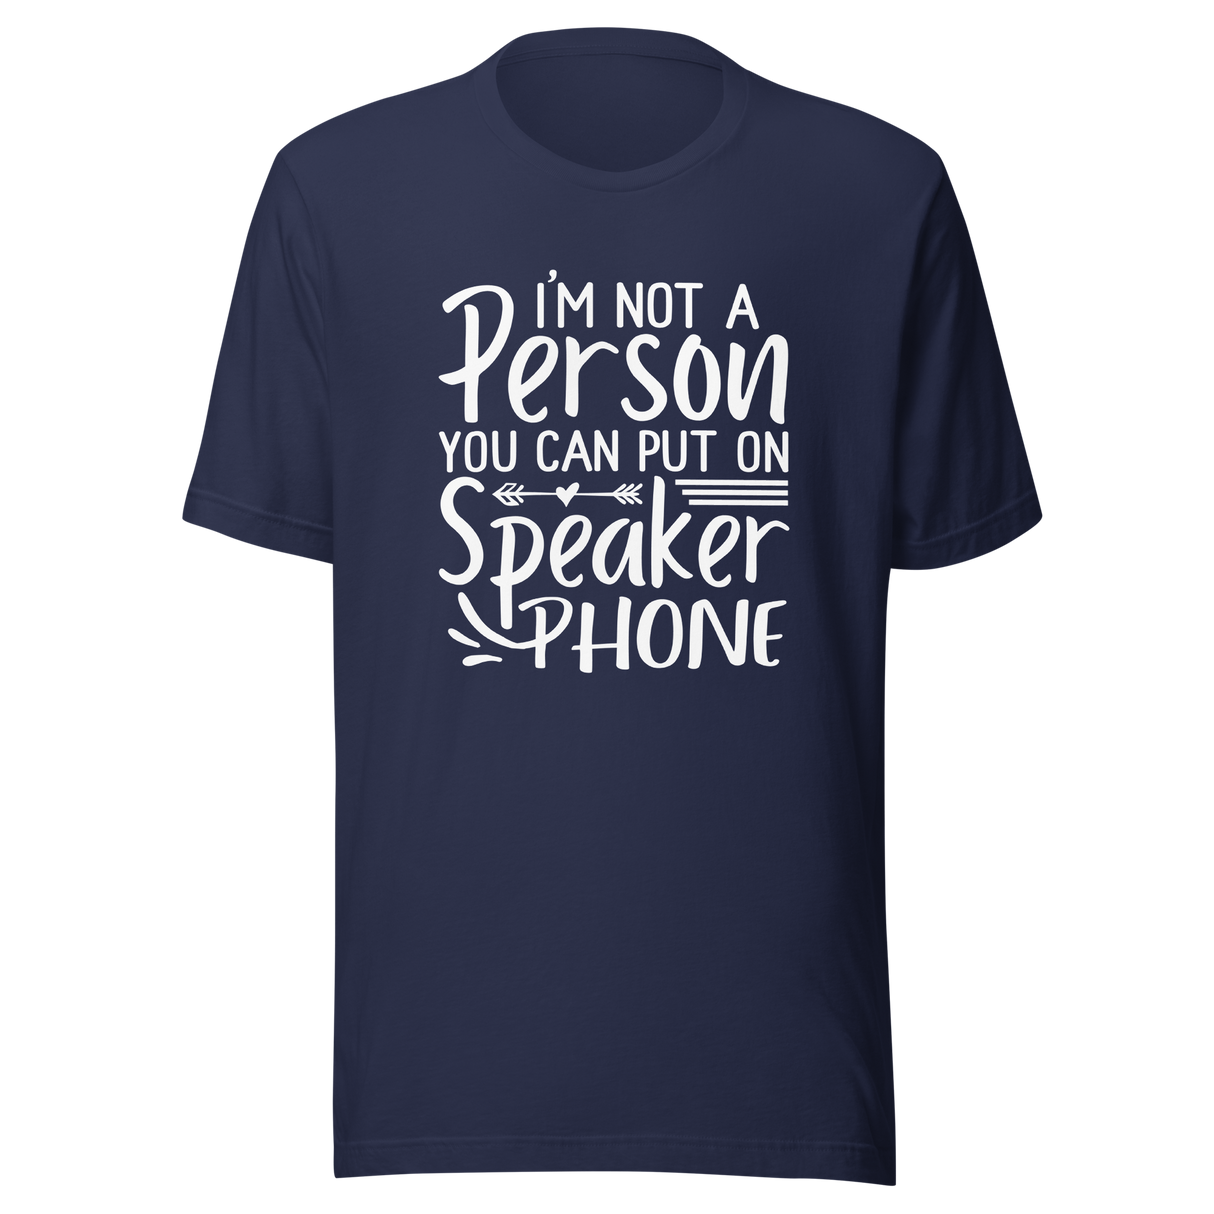 im-not-a-person-you-can-put-on-speaker-phone-speaker-phone-tee-not-a-person-t-shirt-clever-tee-t-shirt-tee#color_navy